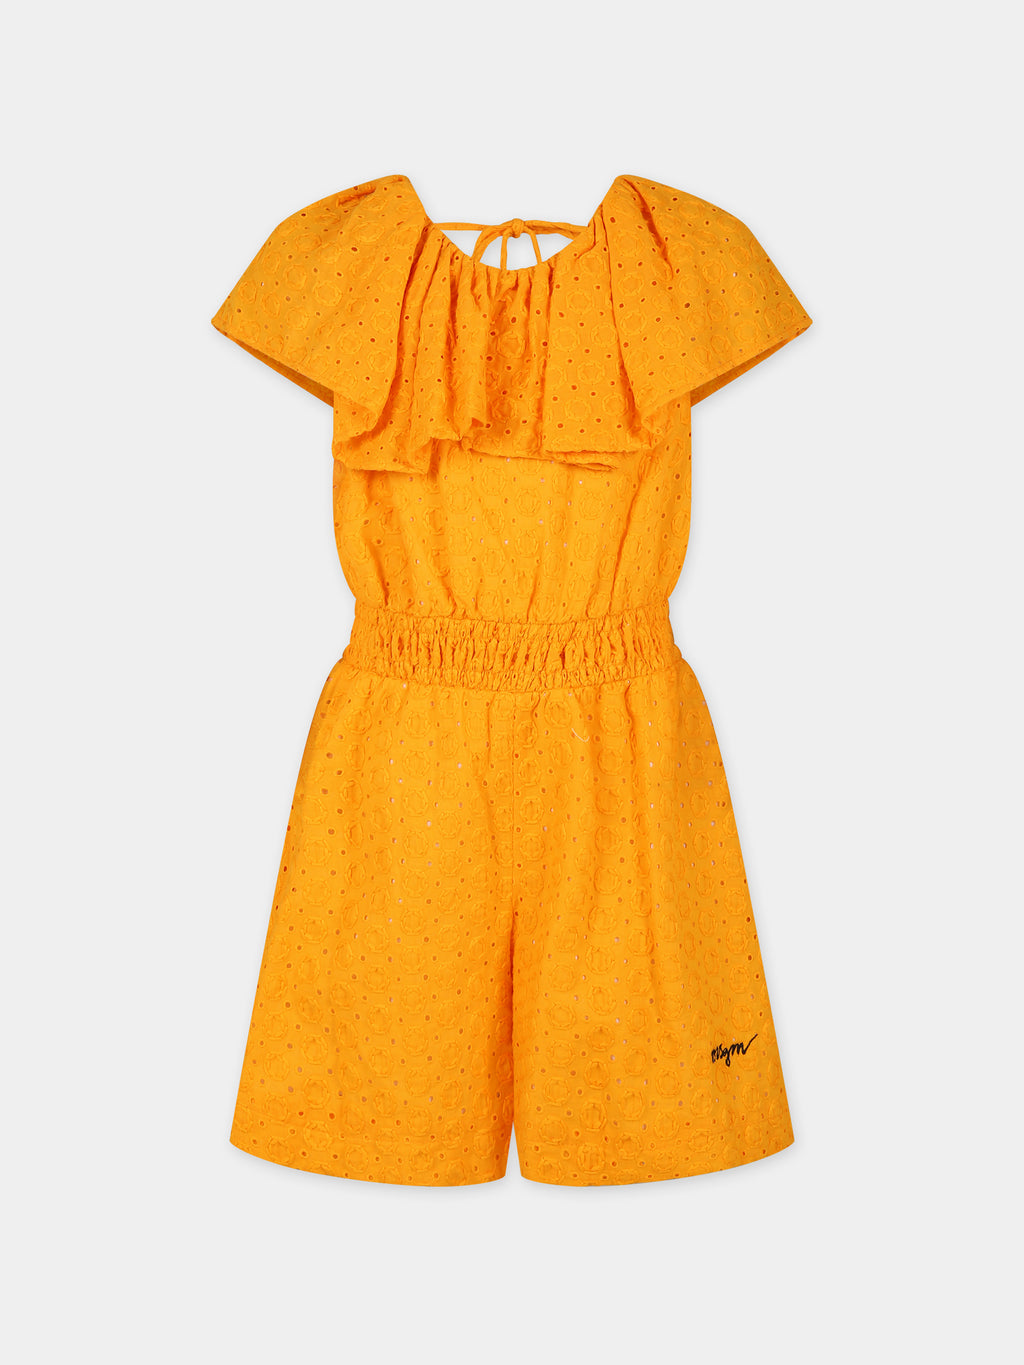 Orange jumsuit for girl with broderie anglaise